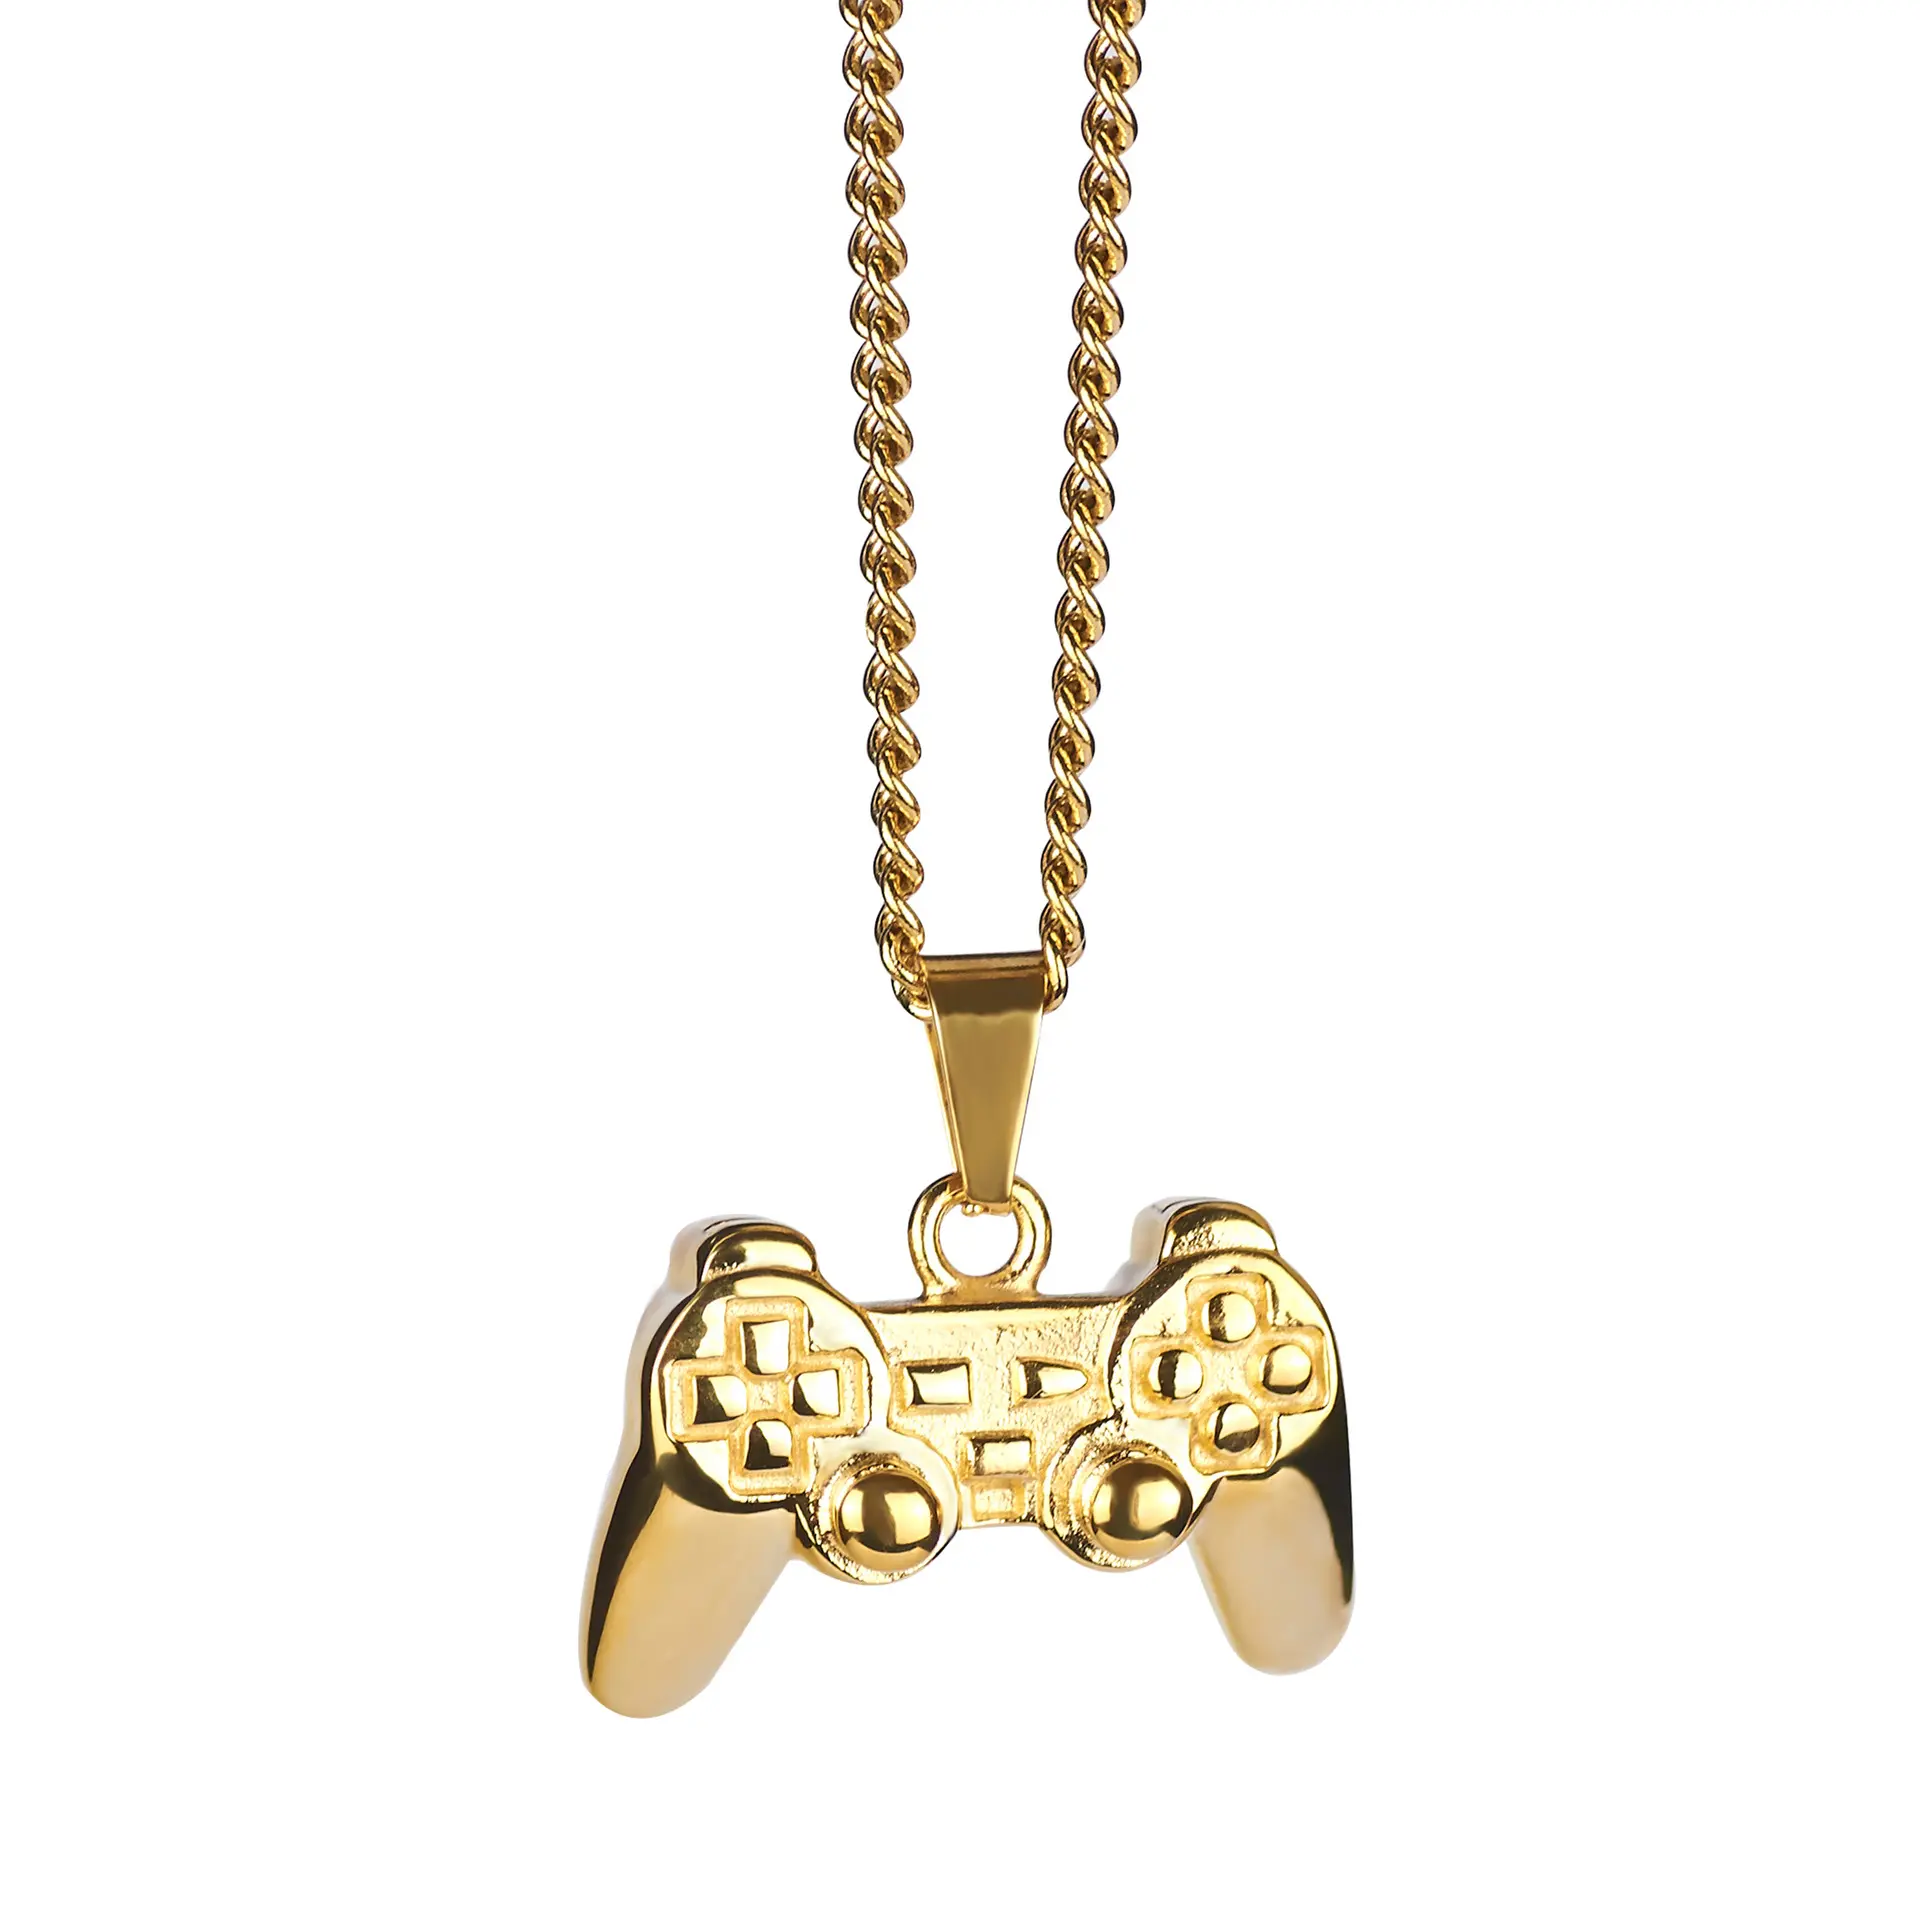 Stainless steel Necklace new product ideas fashion Gamepad pendant gold plated video game controller Necklace